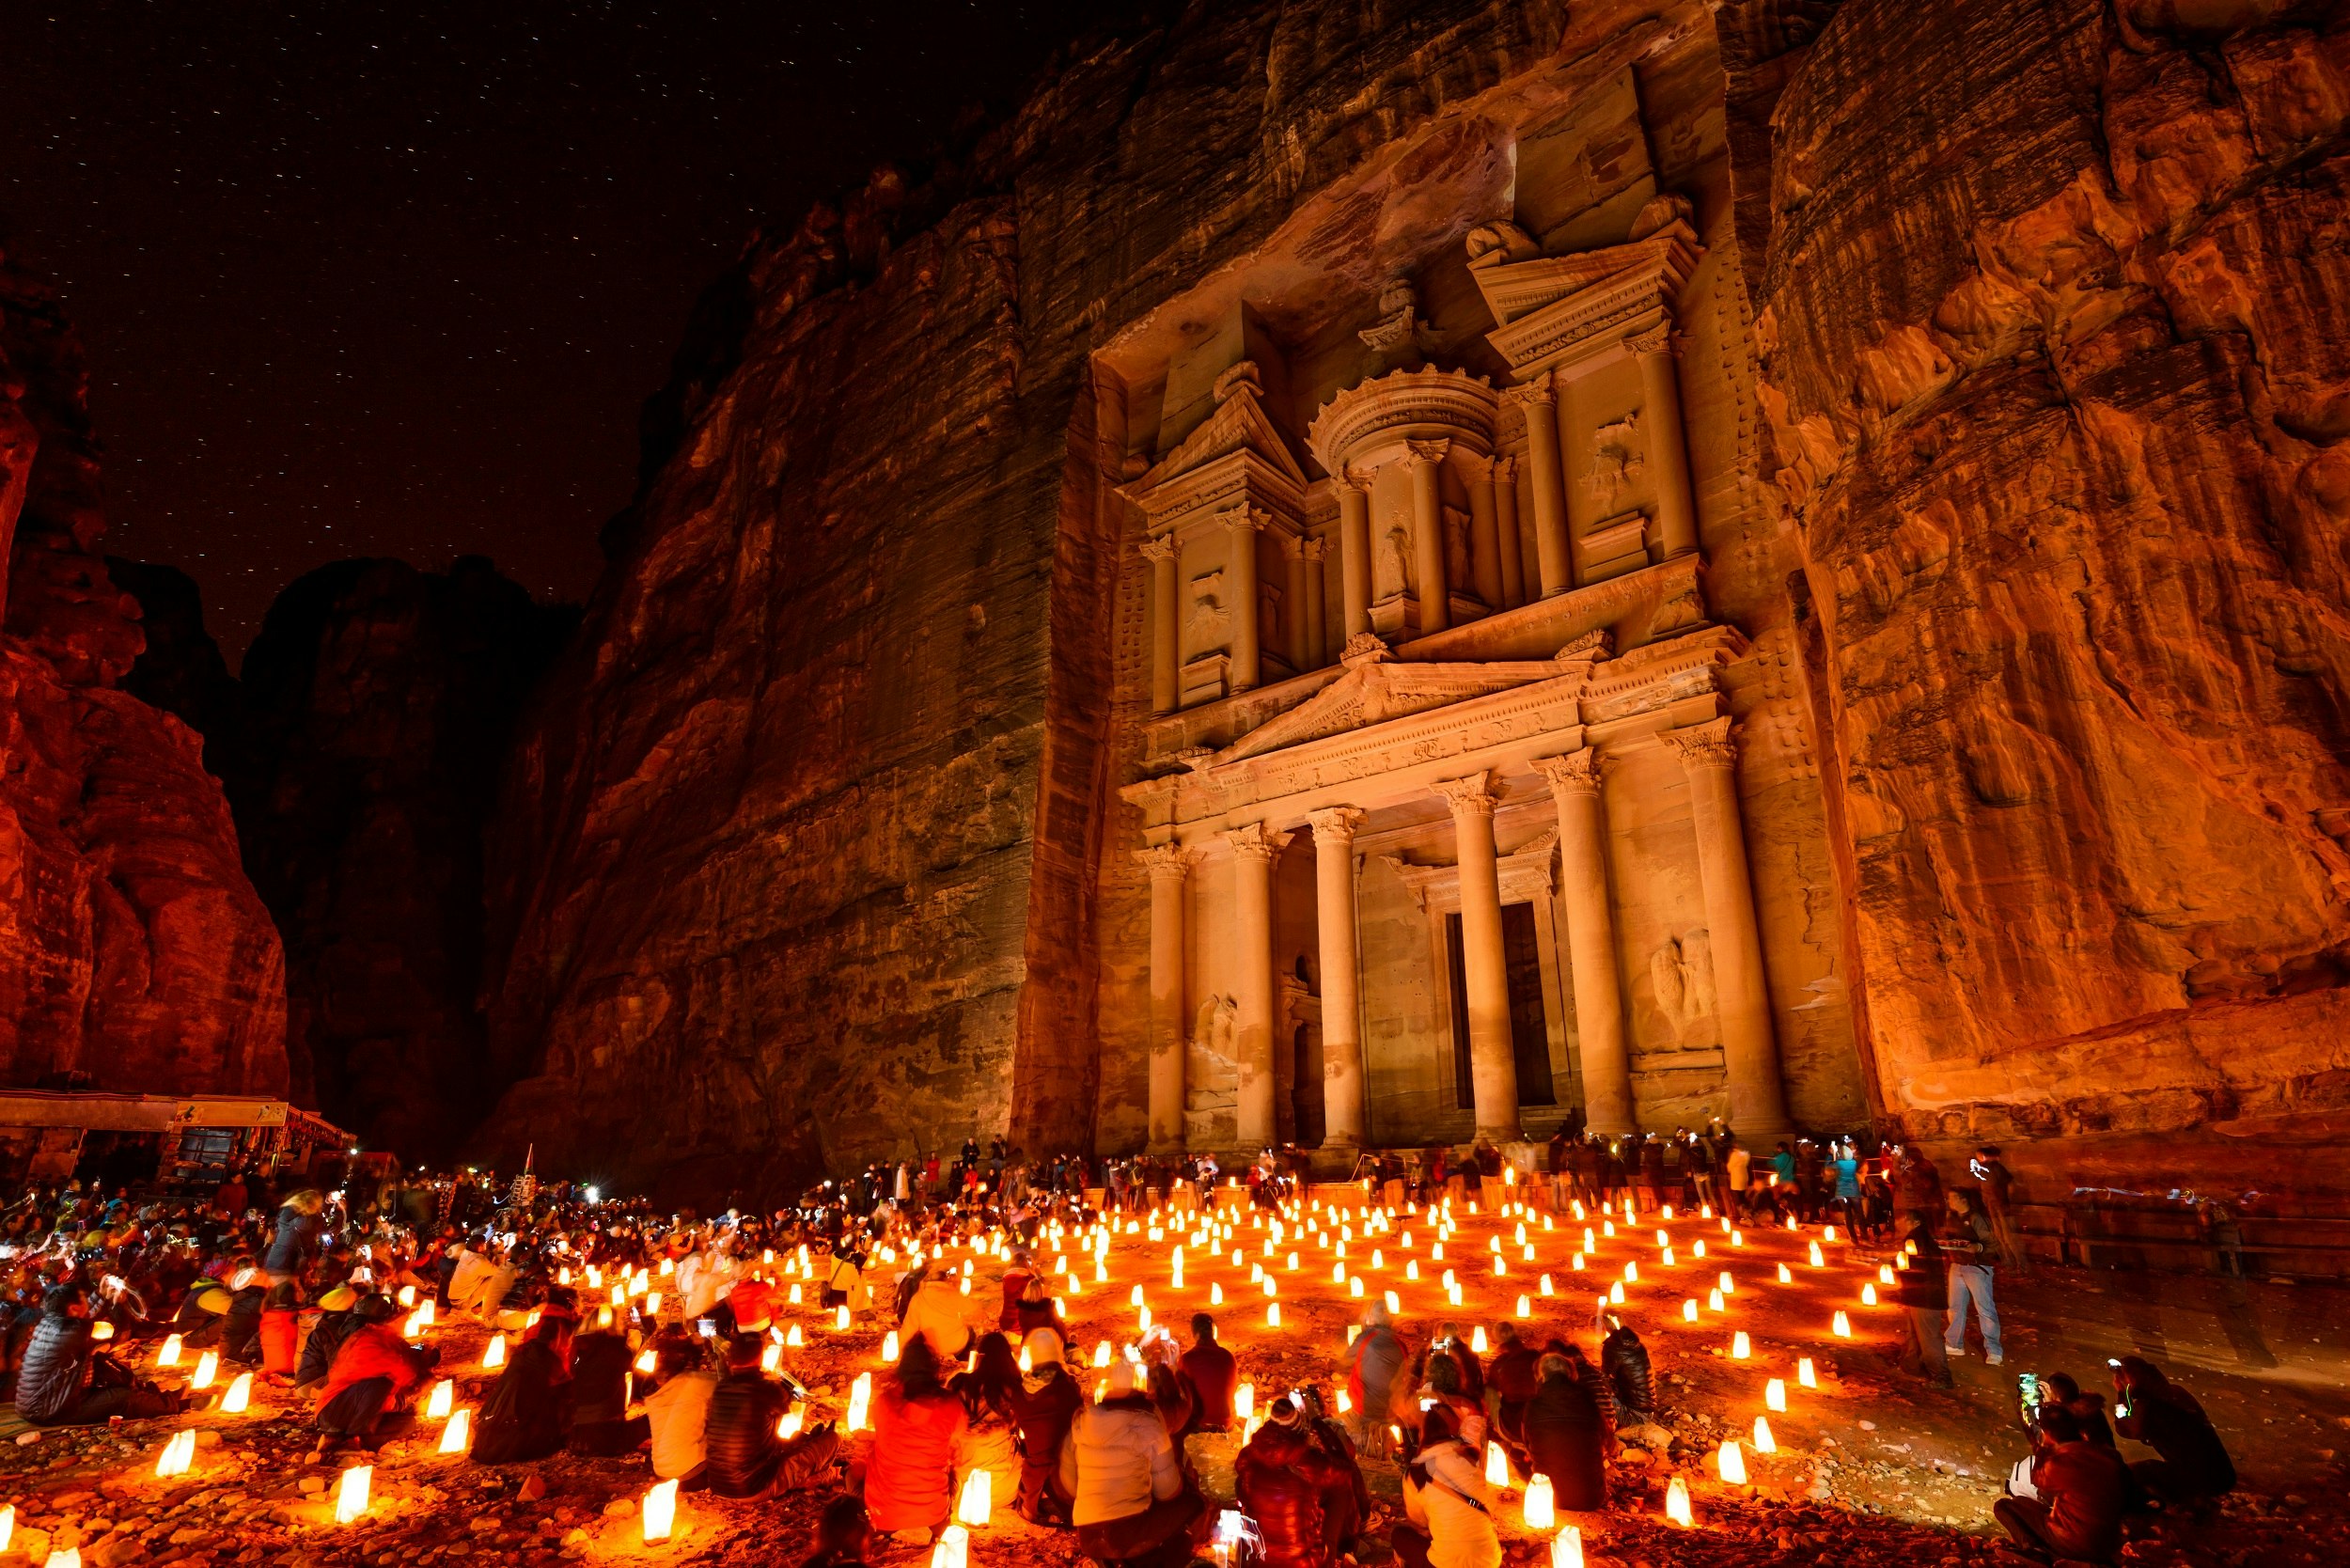 The intricate facade of the Treasury at Petra, which was carved into a cliff centuries ago; the whole seen is glowing from candles on the ground, which sit amongst a crowd of visitors.